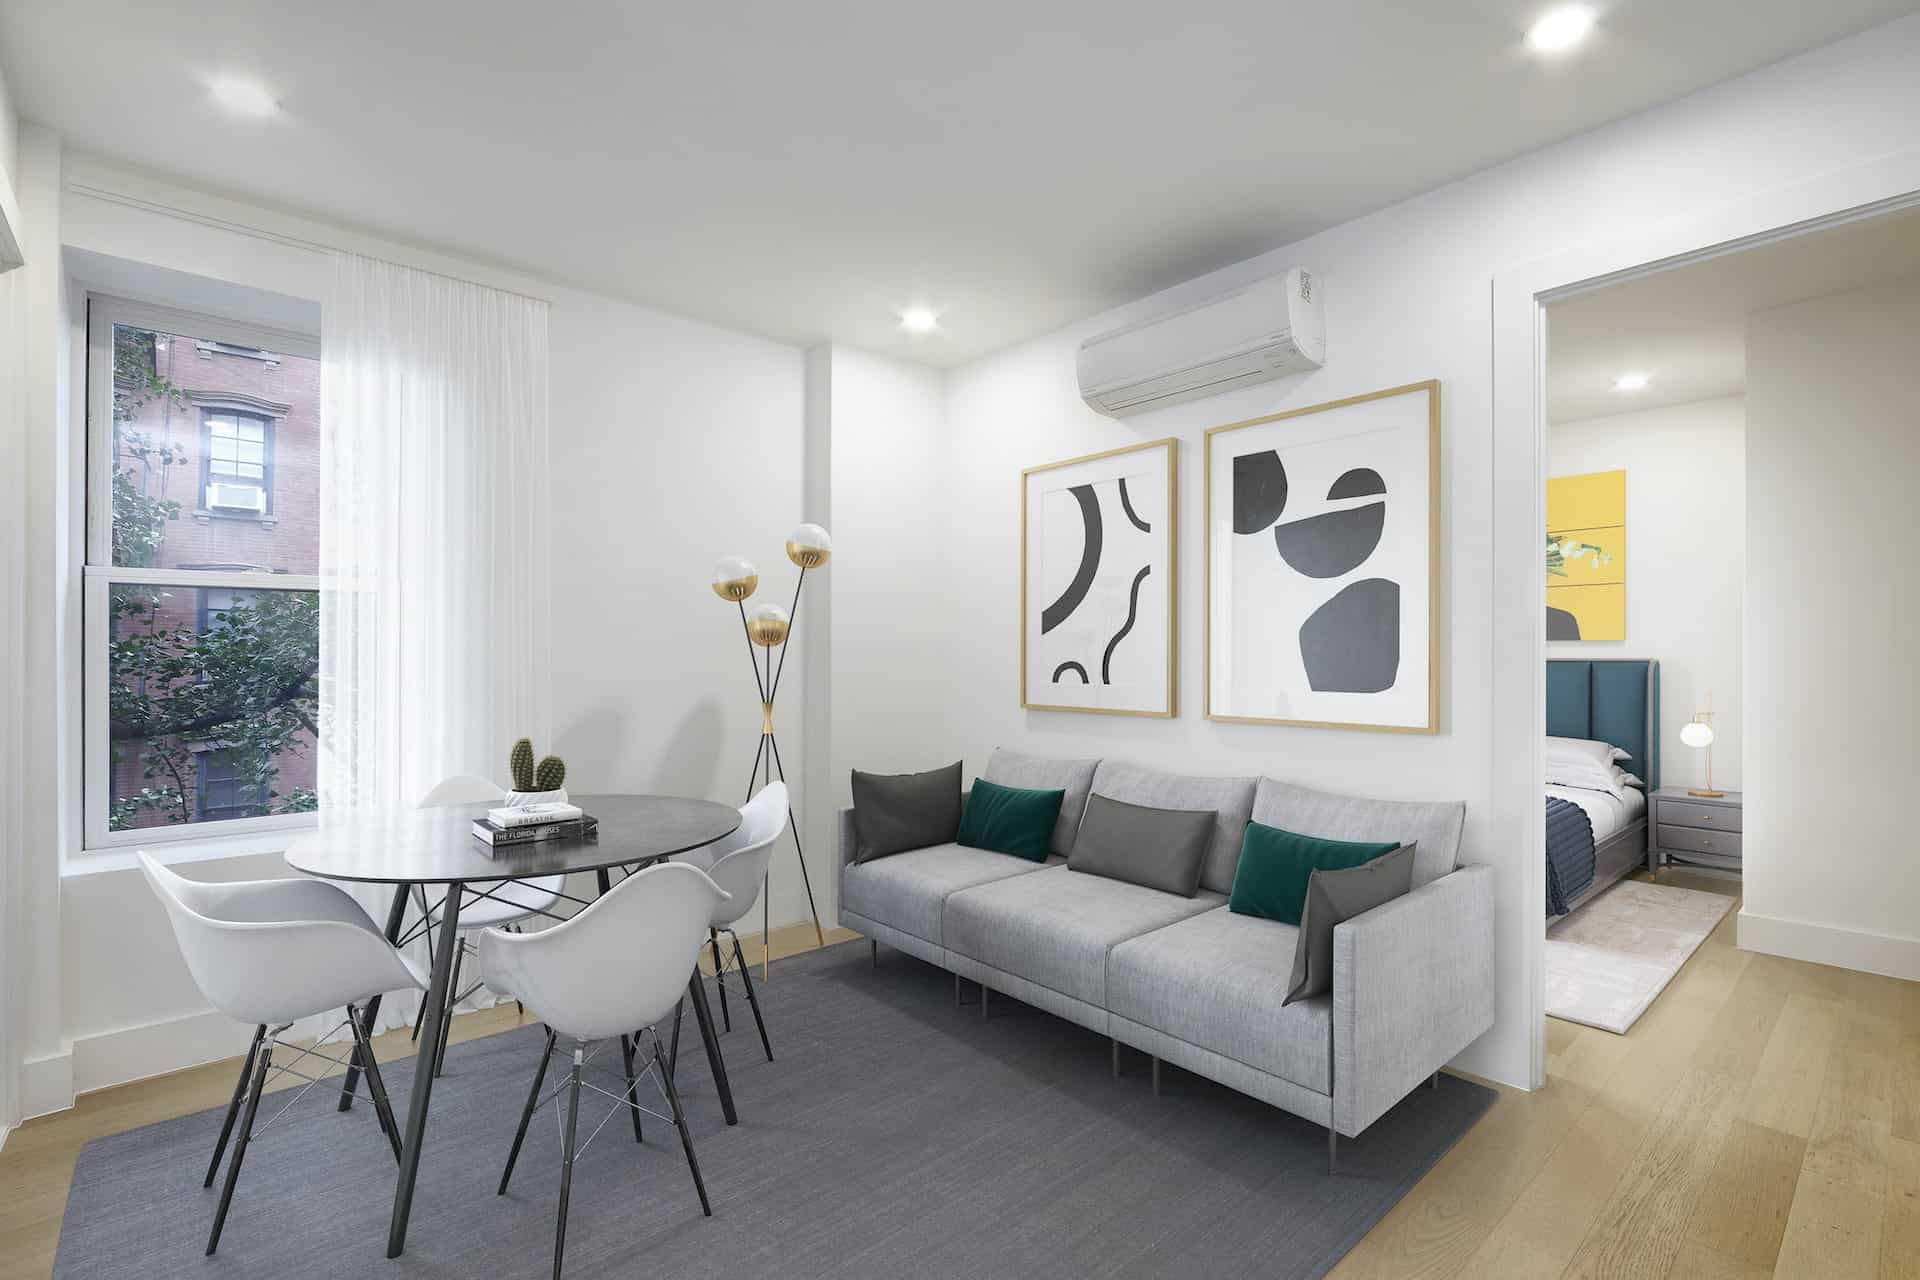 Living room at 236 West 10th Street apartments with a couch, round table, windows, hardwood floors and a bedroom door.